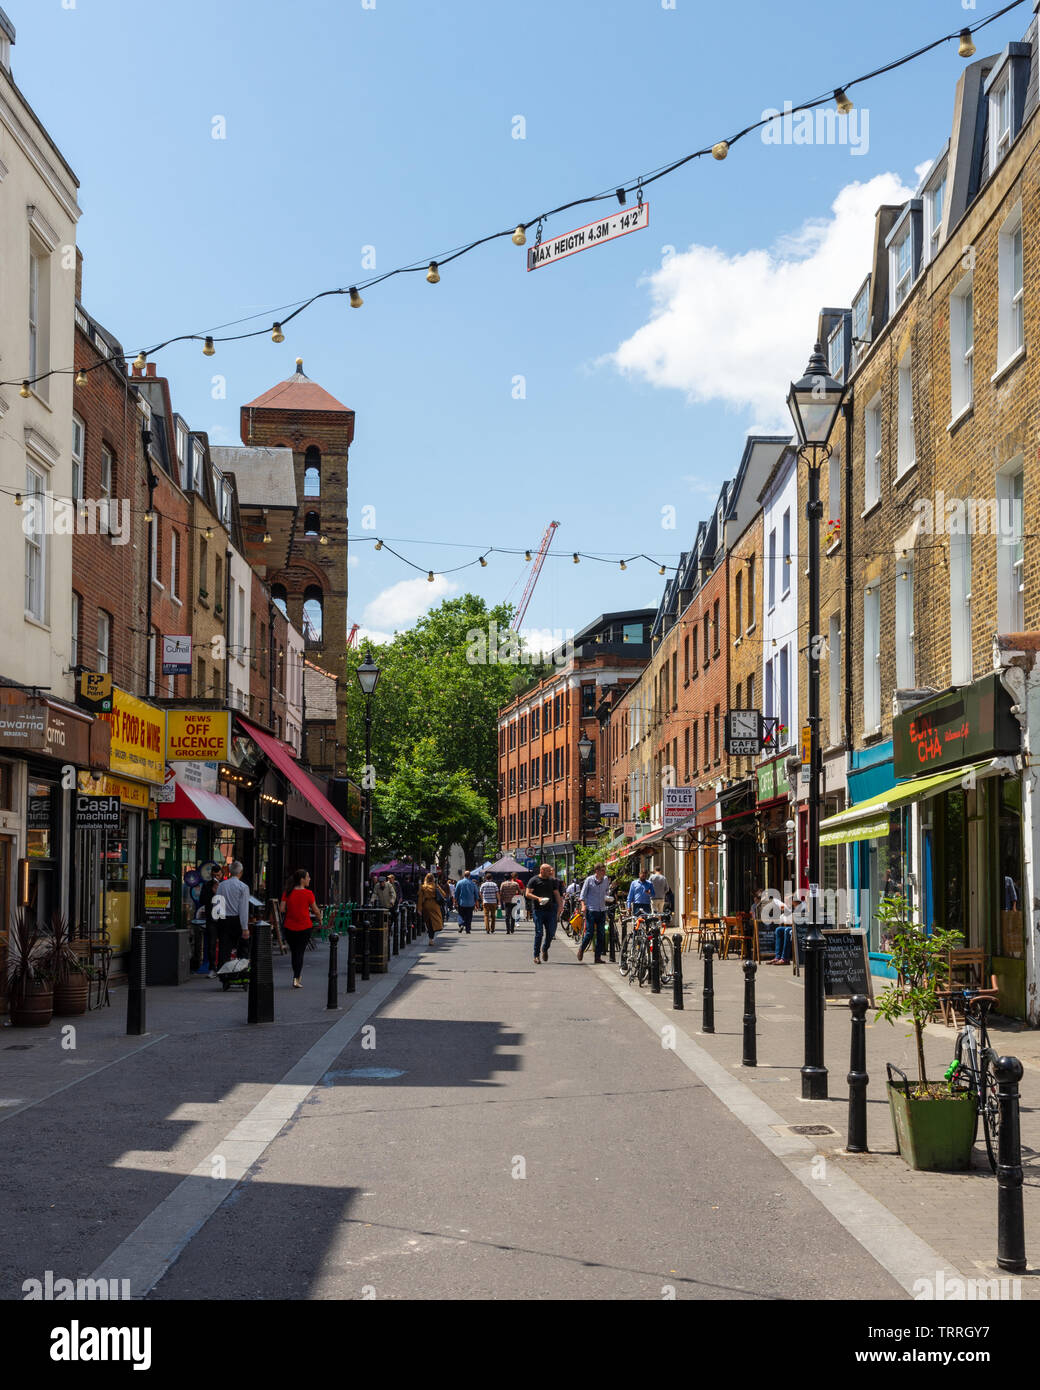 London, England, UK - June 3, 2019: Pedestrians browse shops and restuarants on Exmouth Market in London. Stock Photo